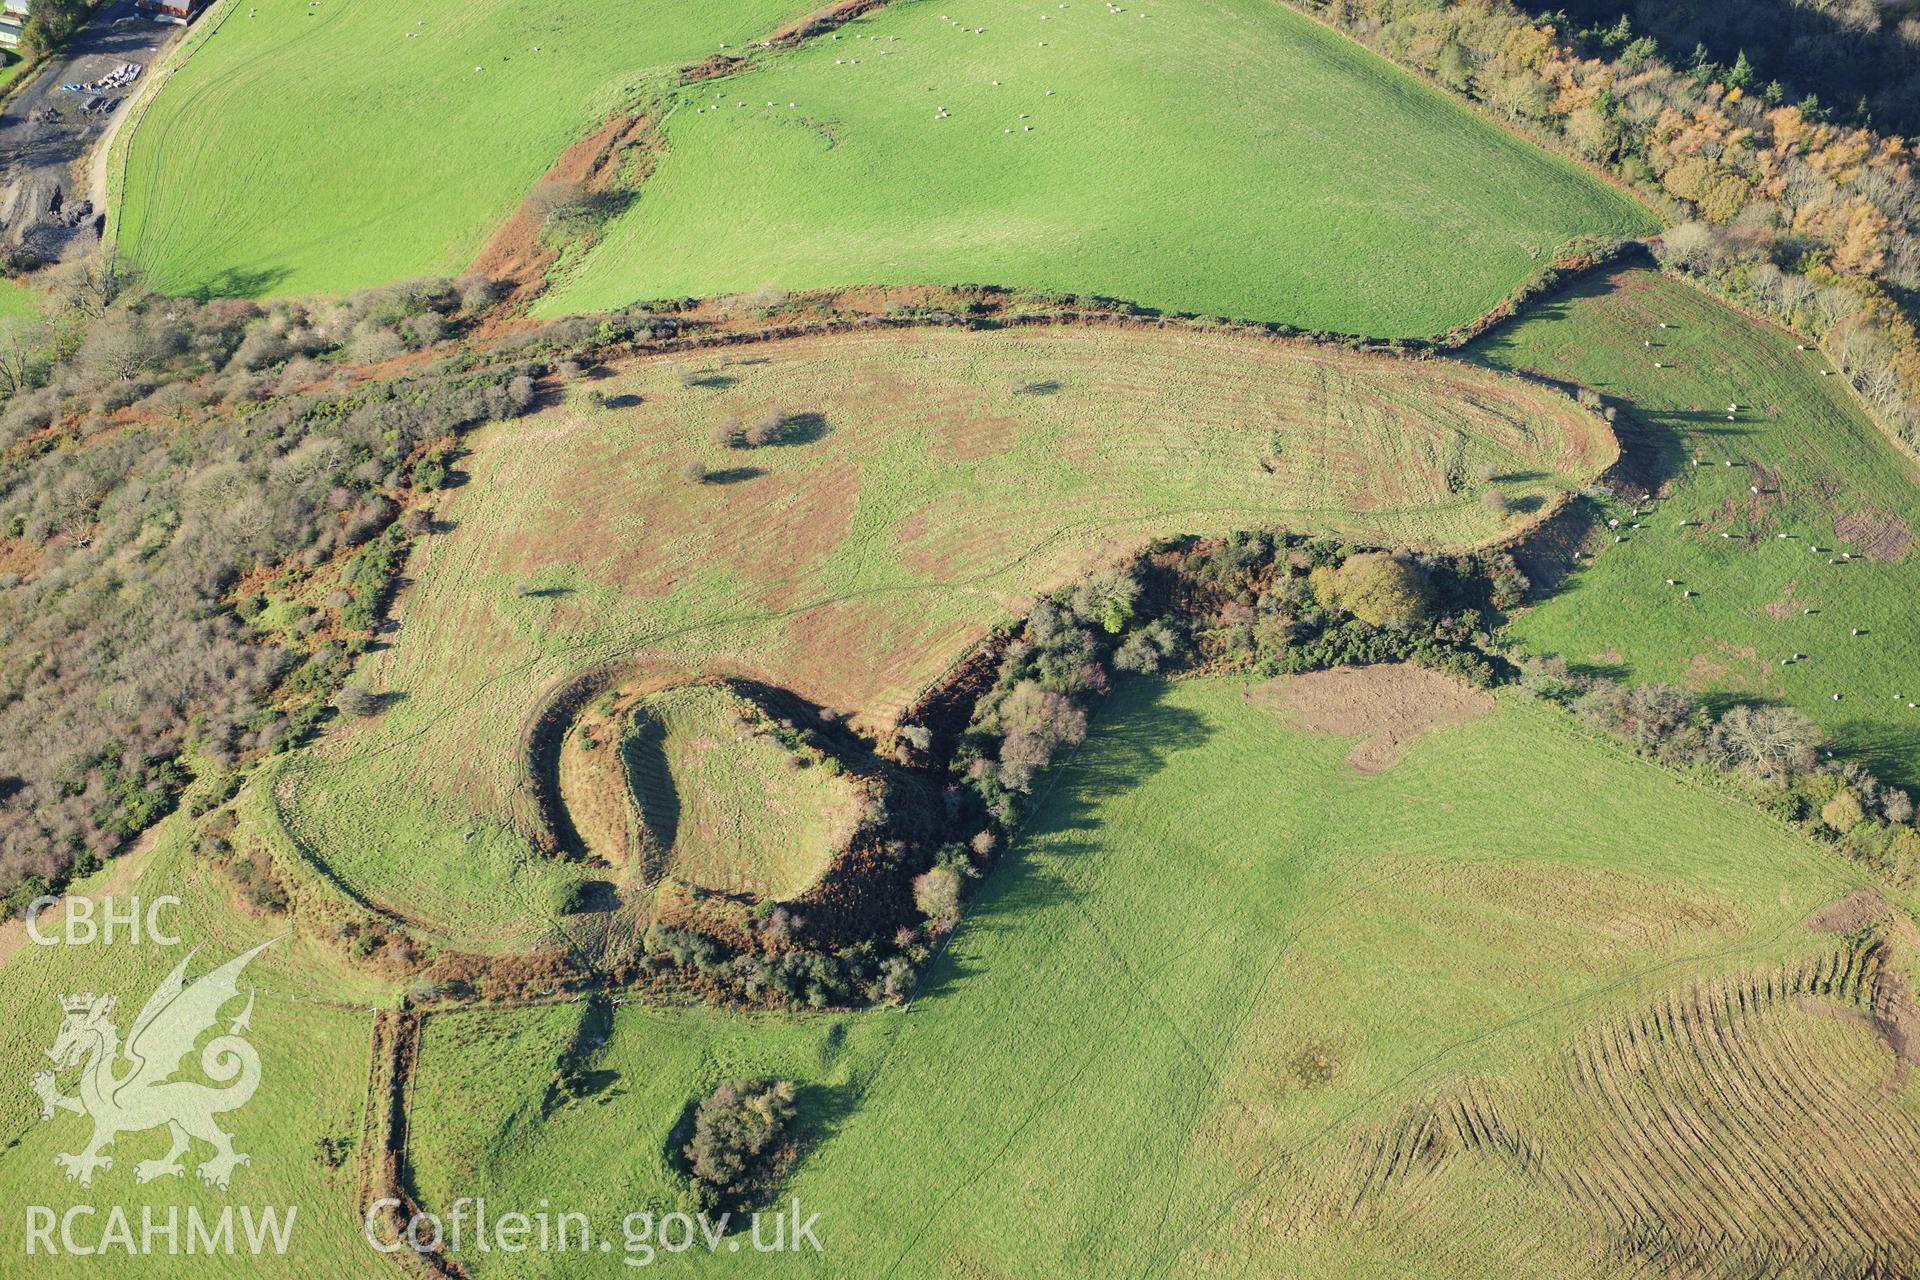 RCAHMW colour oblique photograph of Caer Penrhos hillfort and castle. Taken by Toby Driver on 05/11/2012.